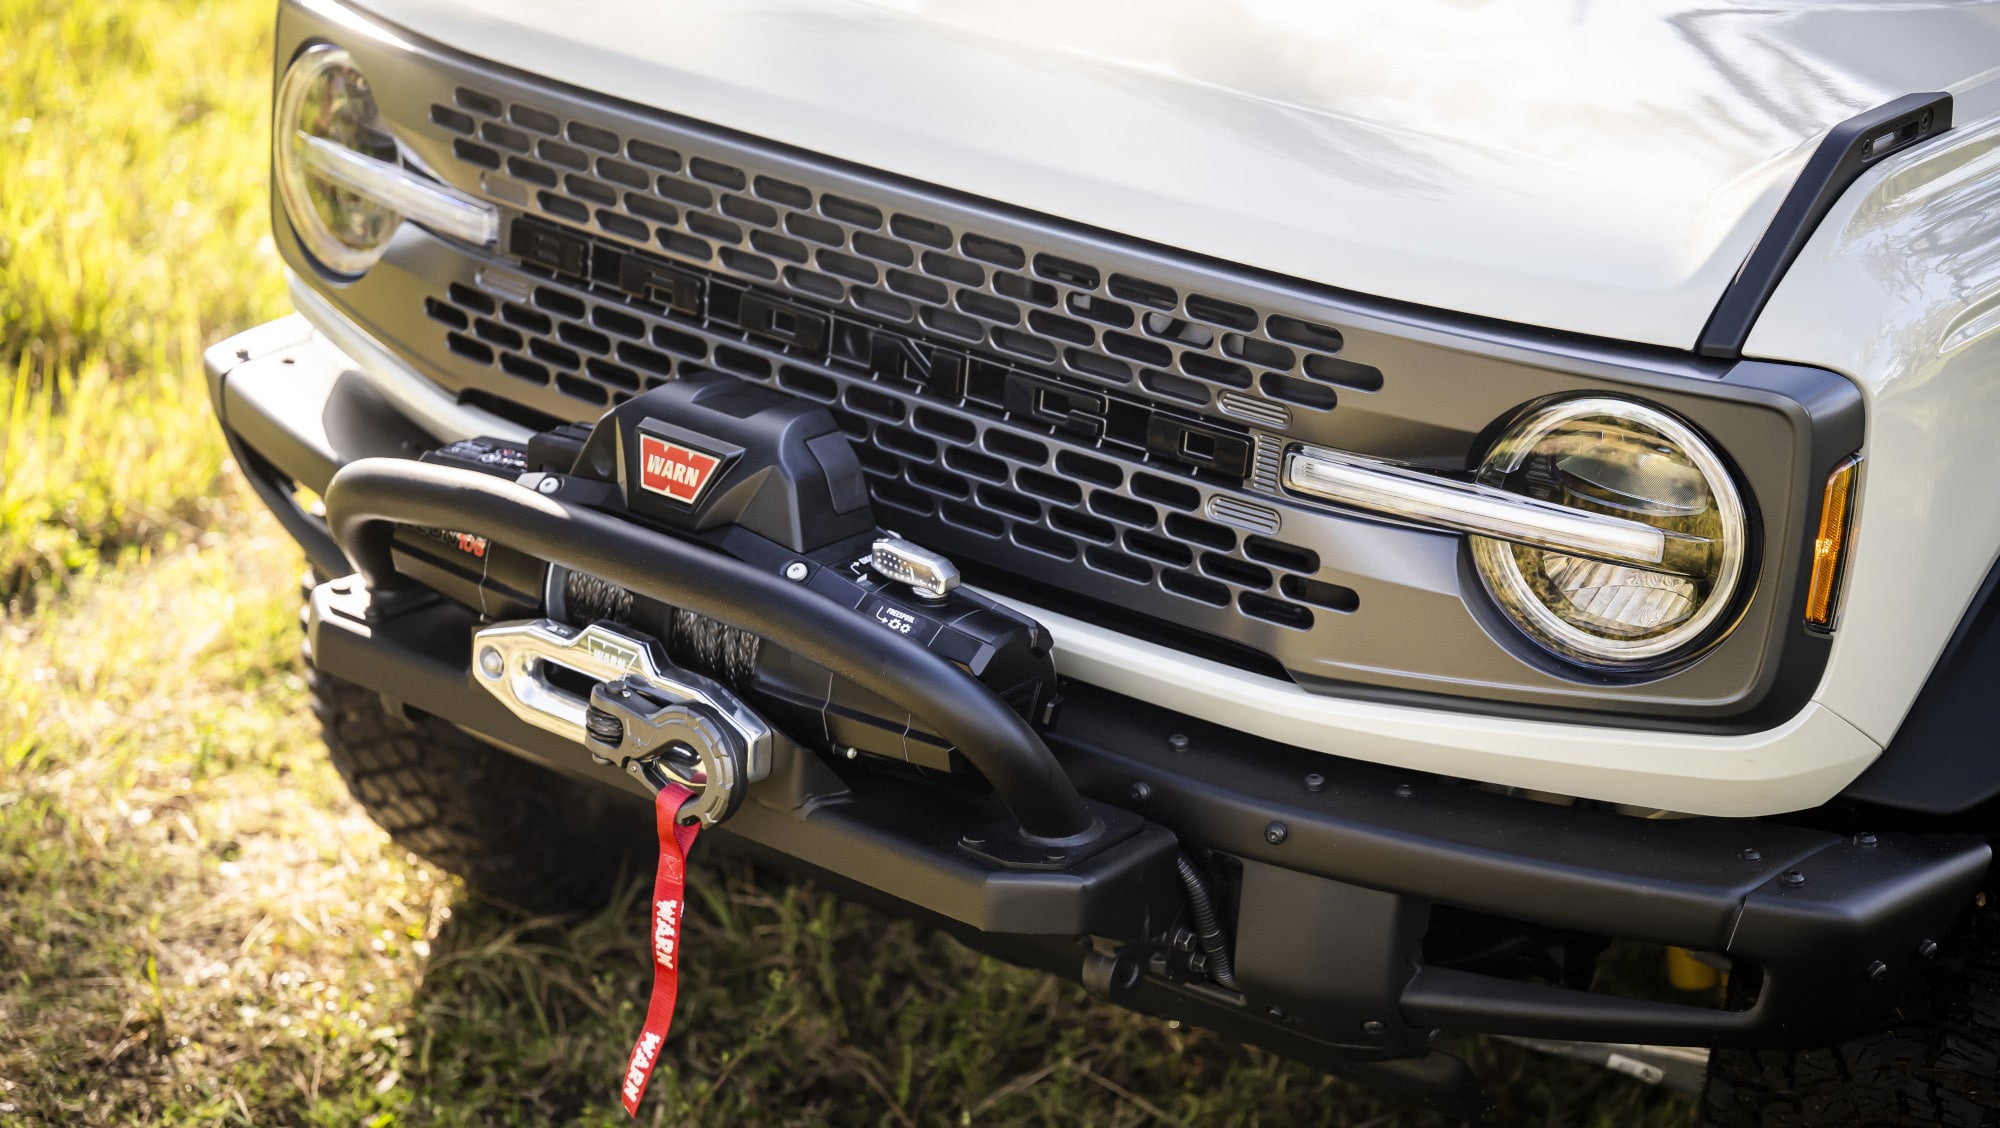 The WARN ZEON 10-S winch built into the front bumper.